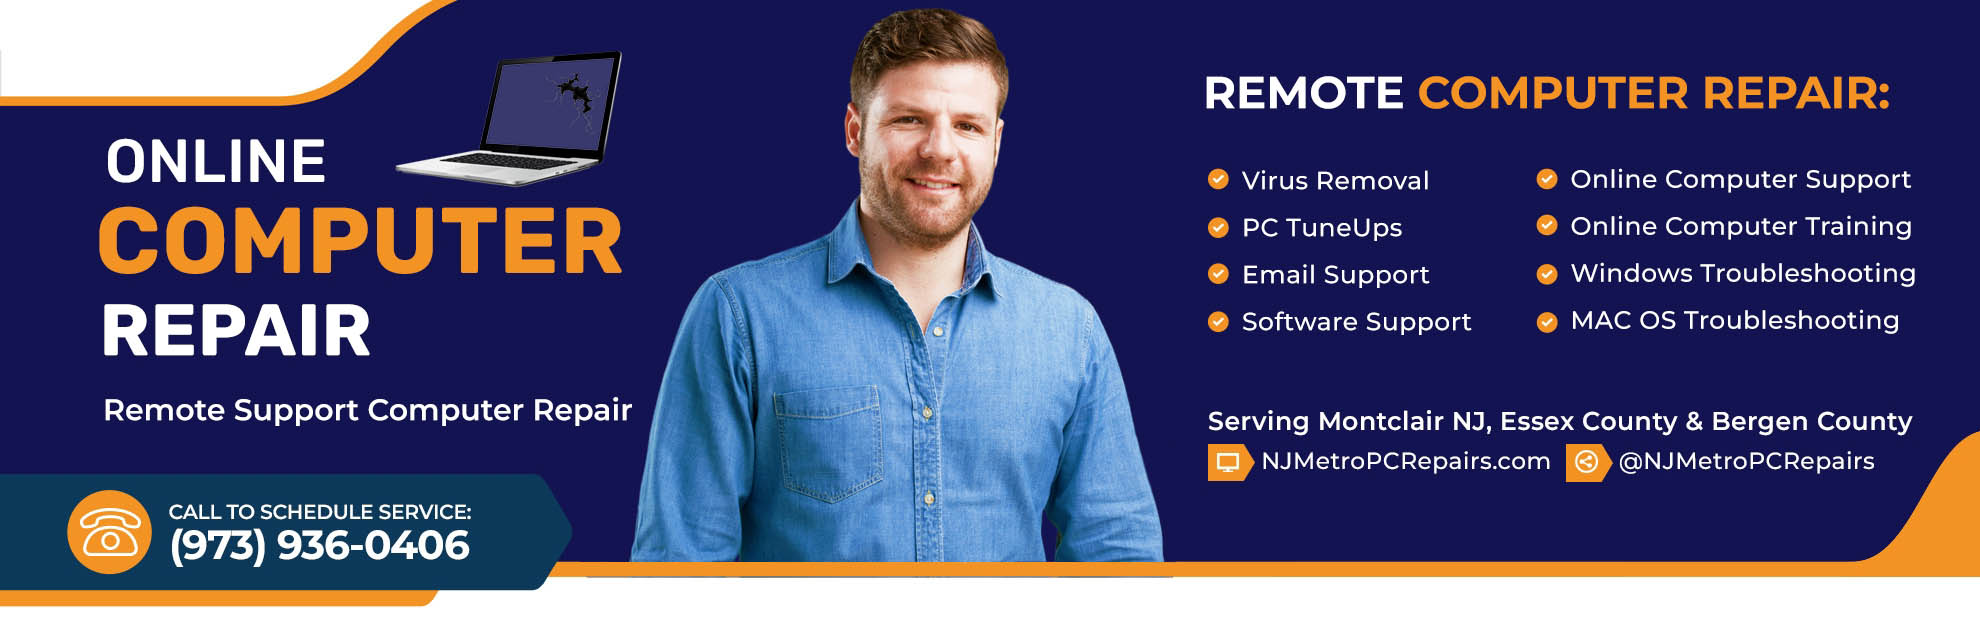 Banner Image with Confident Smiling Computer Repair Technician and A List Of Online Computer Repair Services